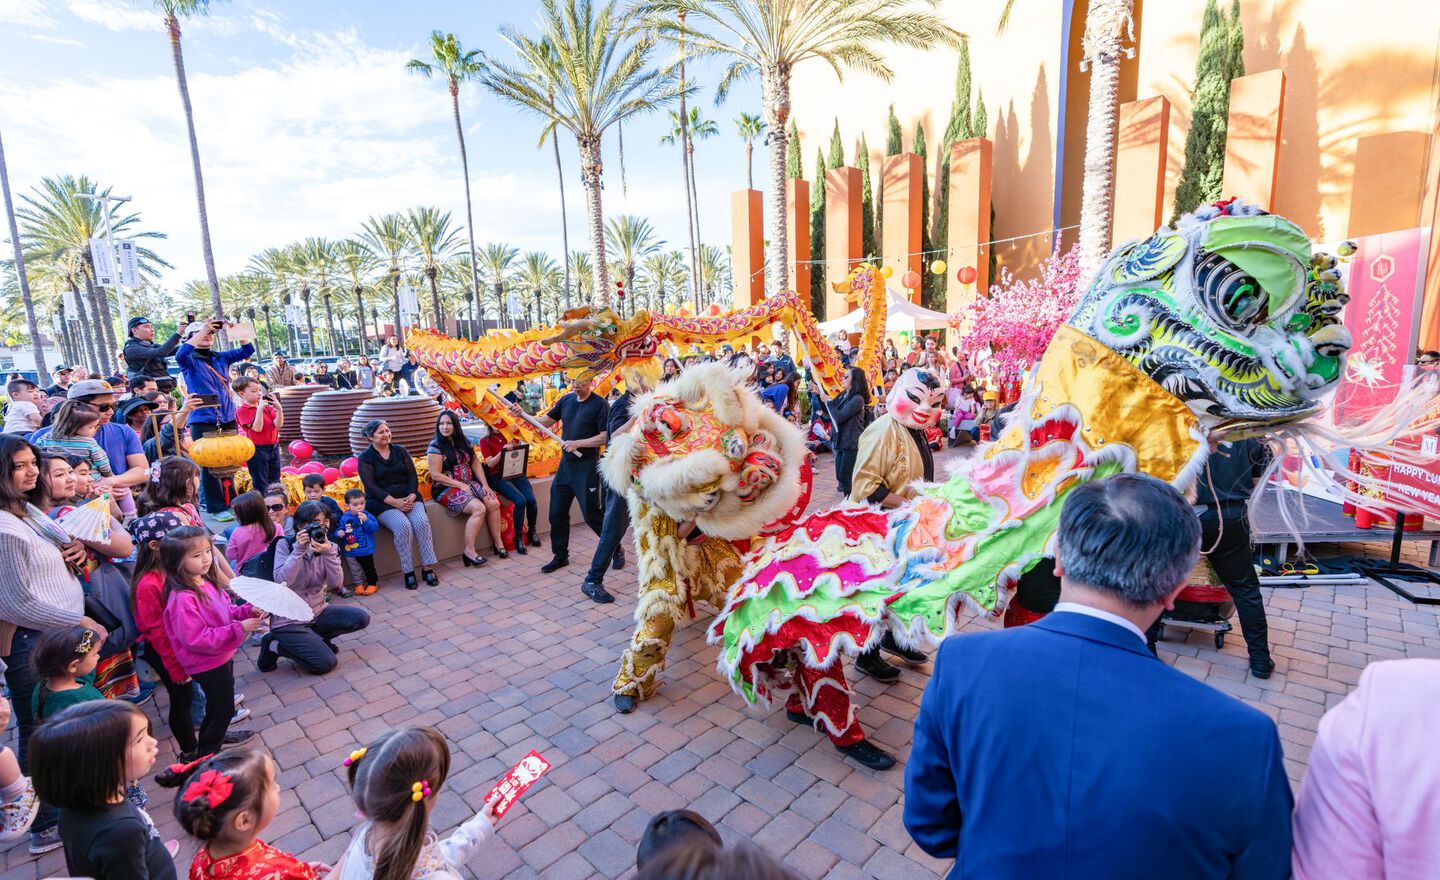 A group of people enjoying the Lunar New Year tradition of lion and dragon dances